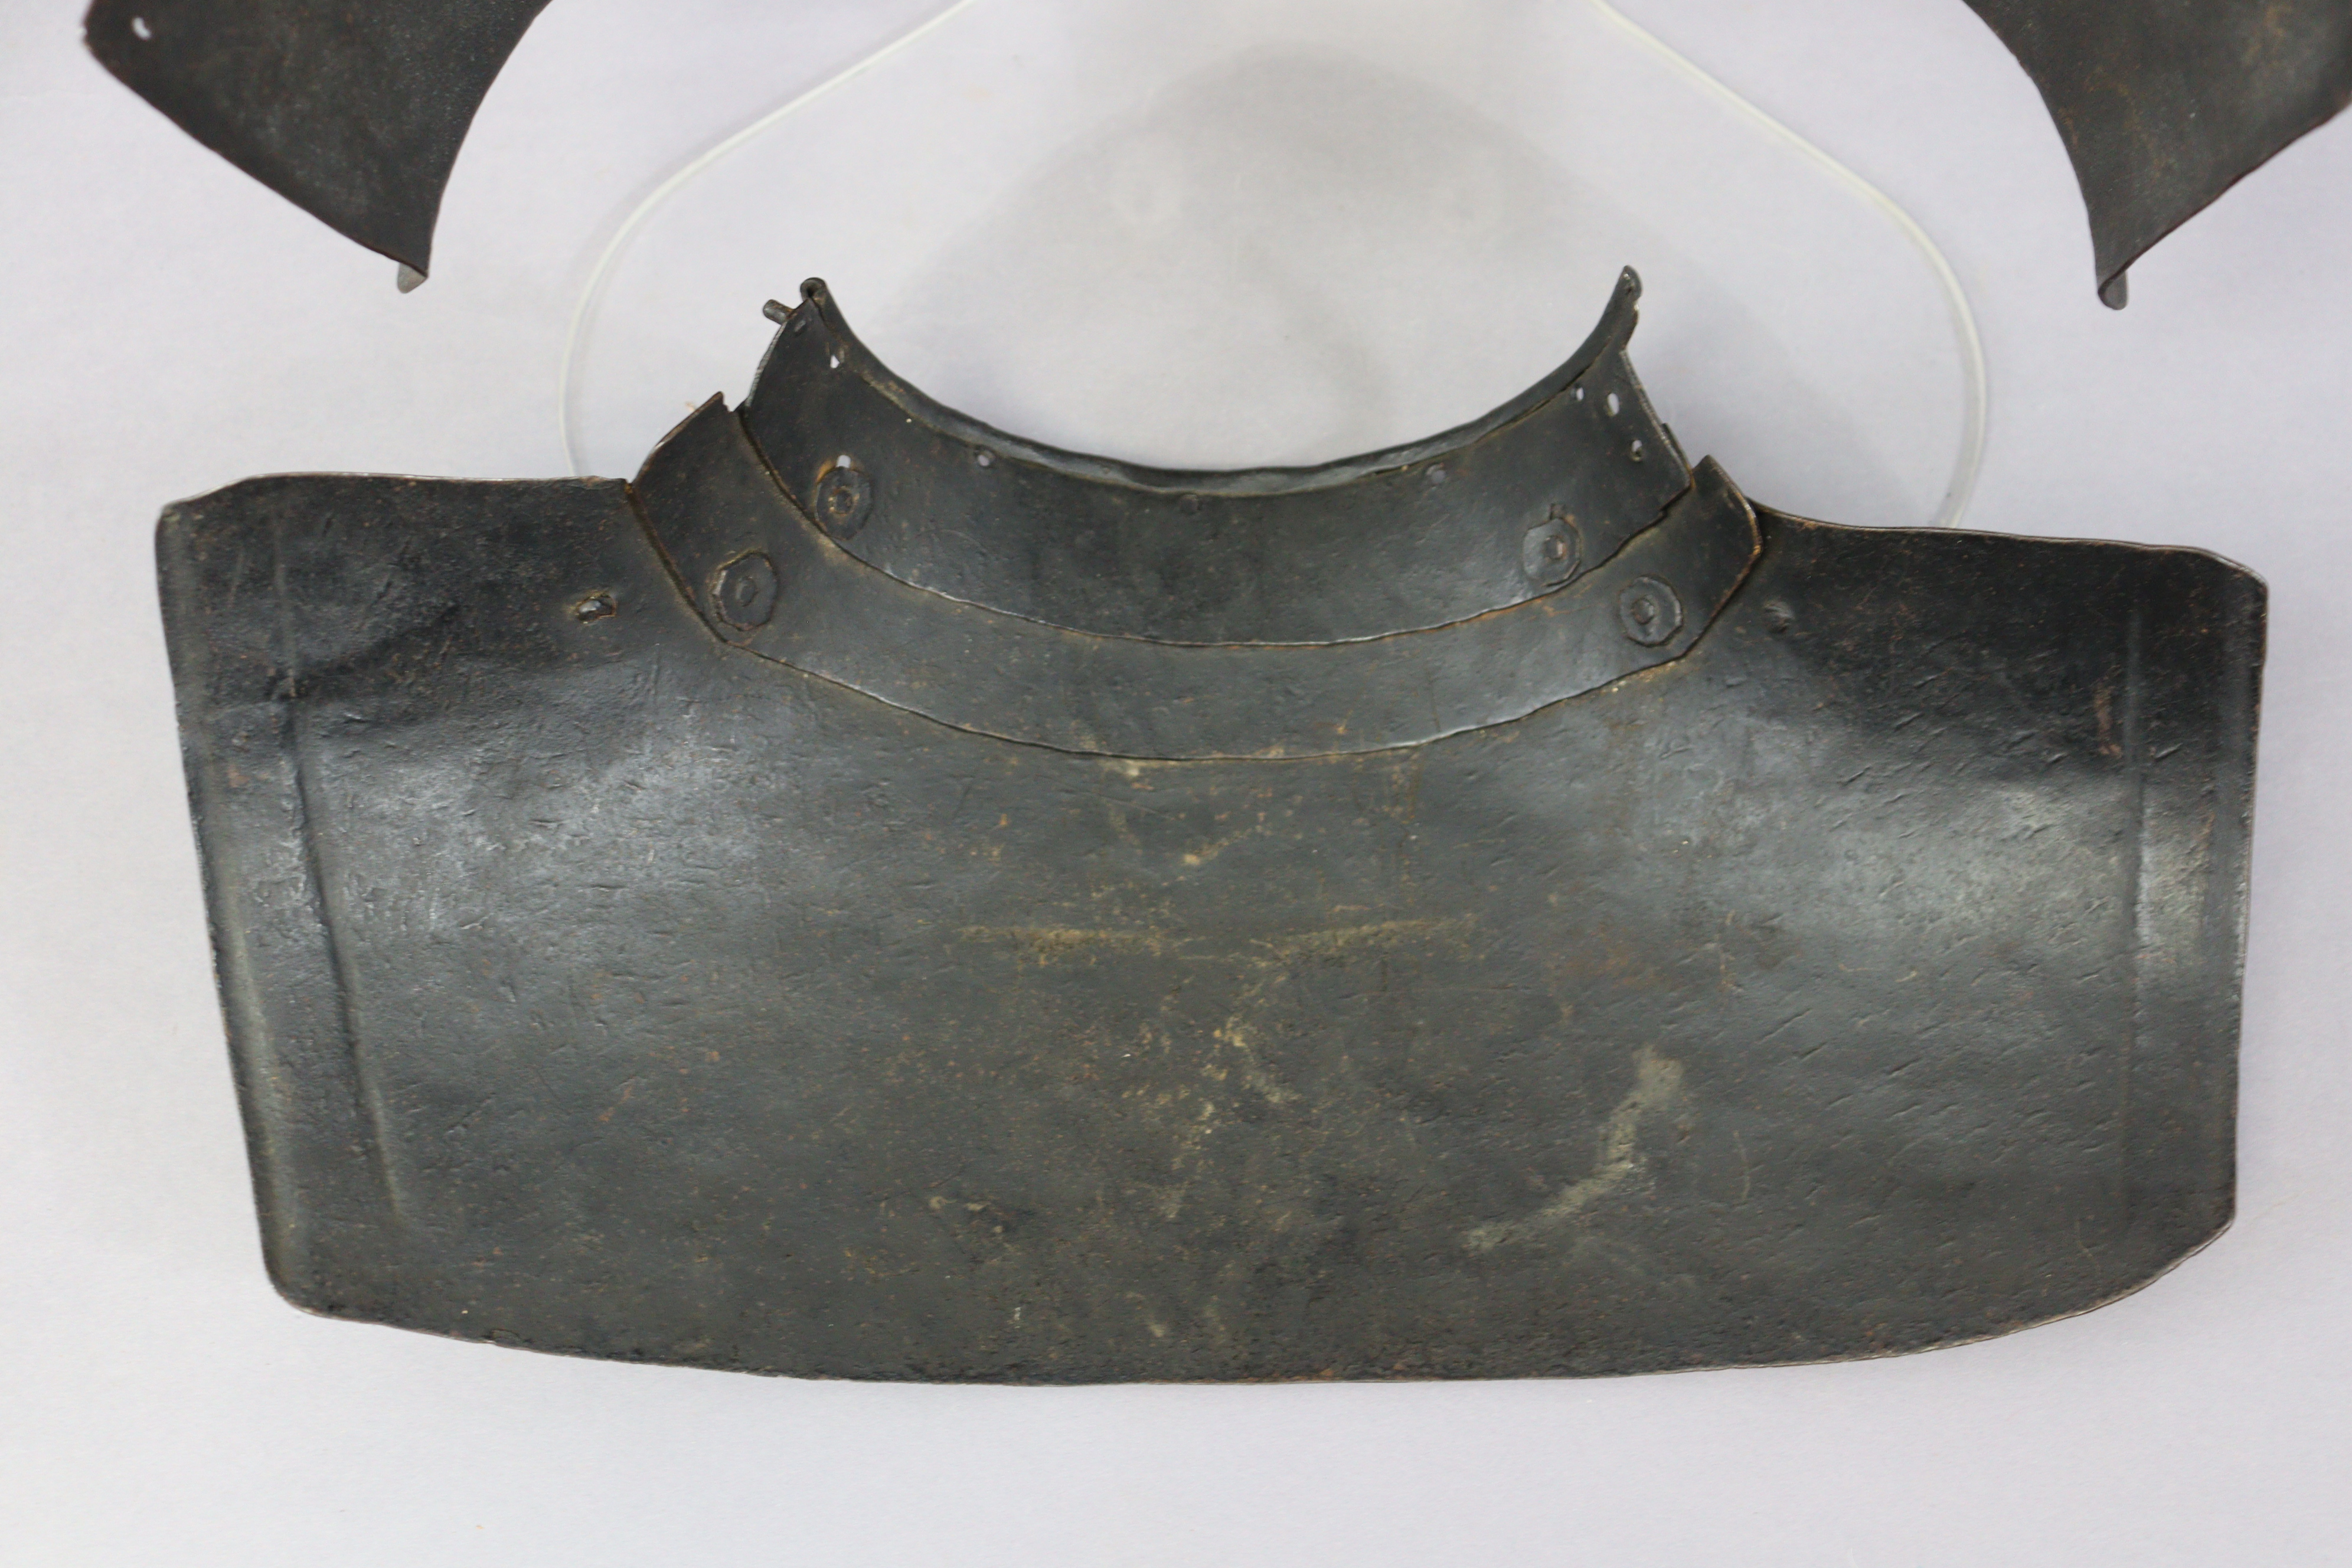 An English Civil War period lobster-tail steel helmet & breastplate, the pot helmet of typical form, - Image 11 of 11